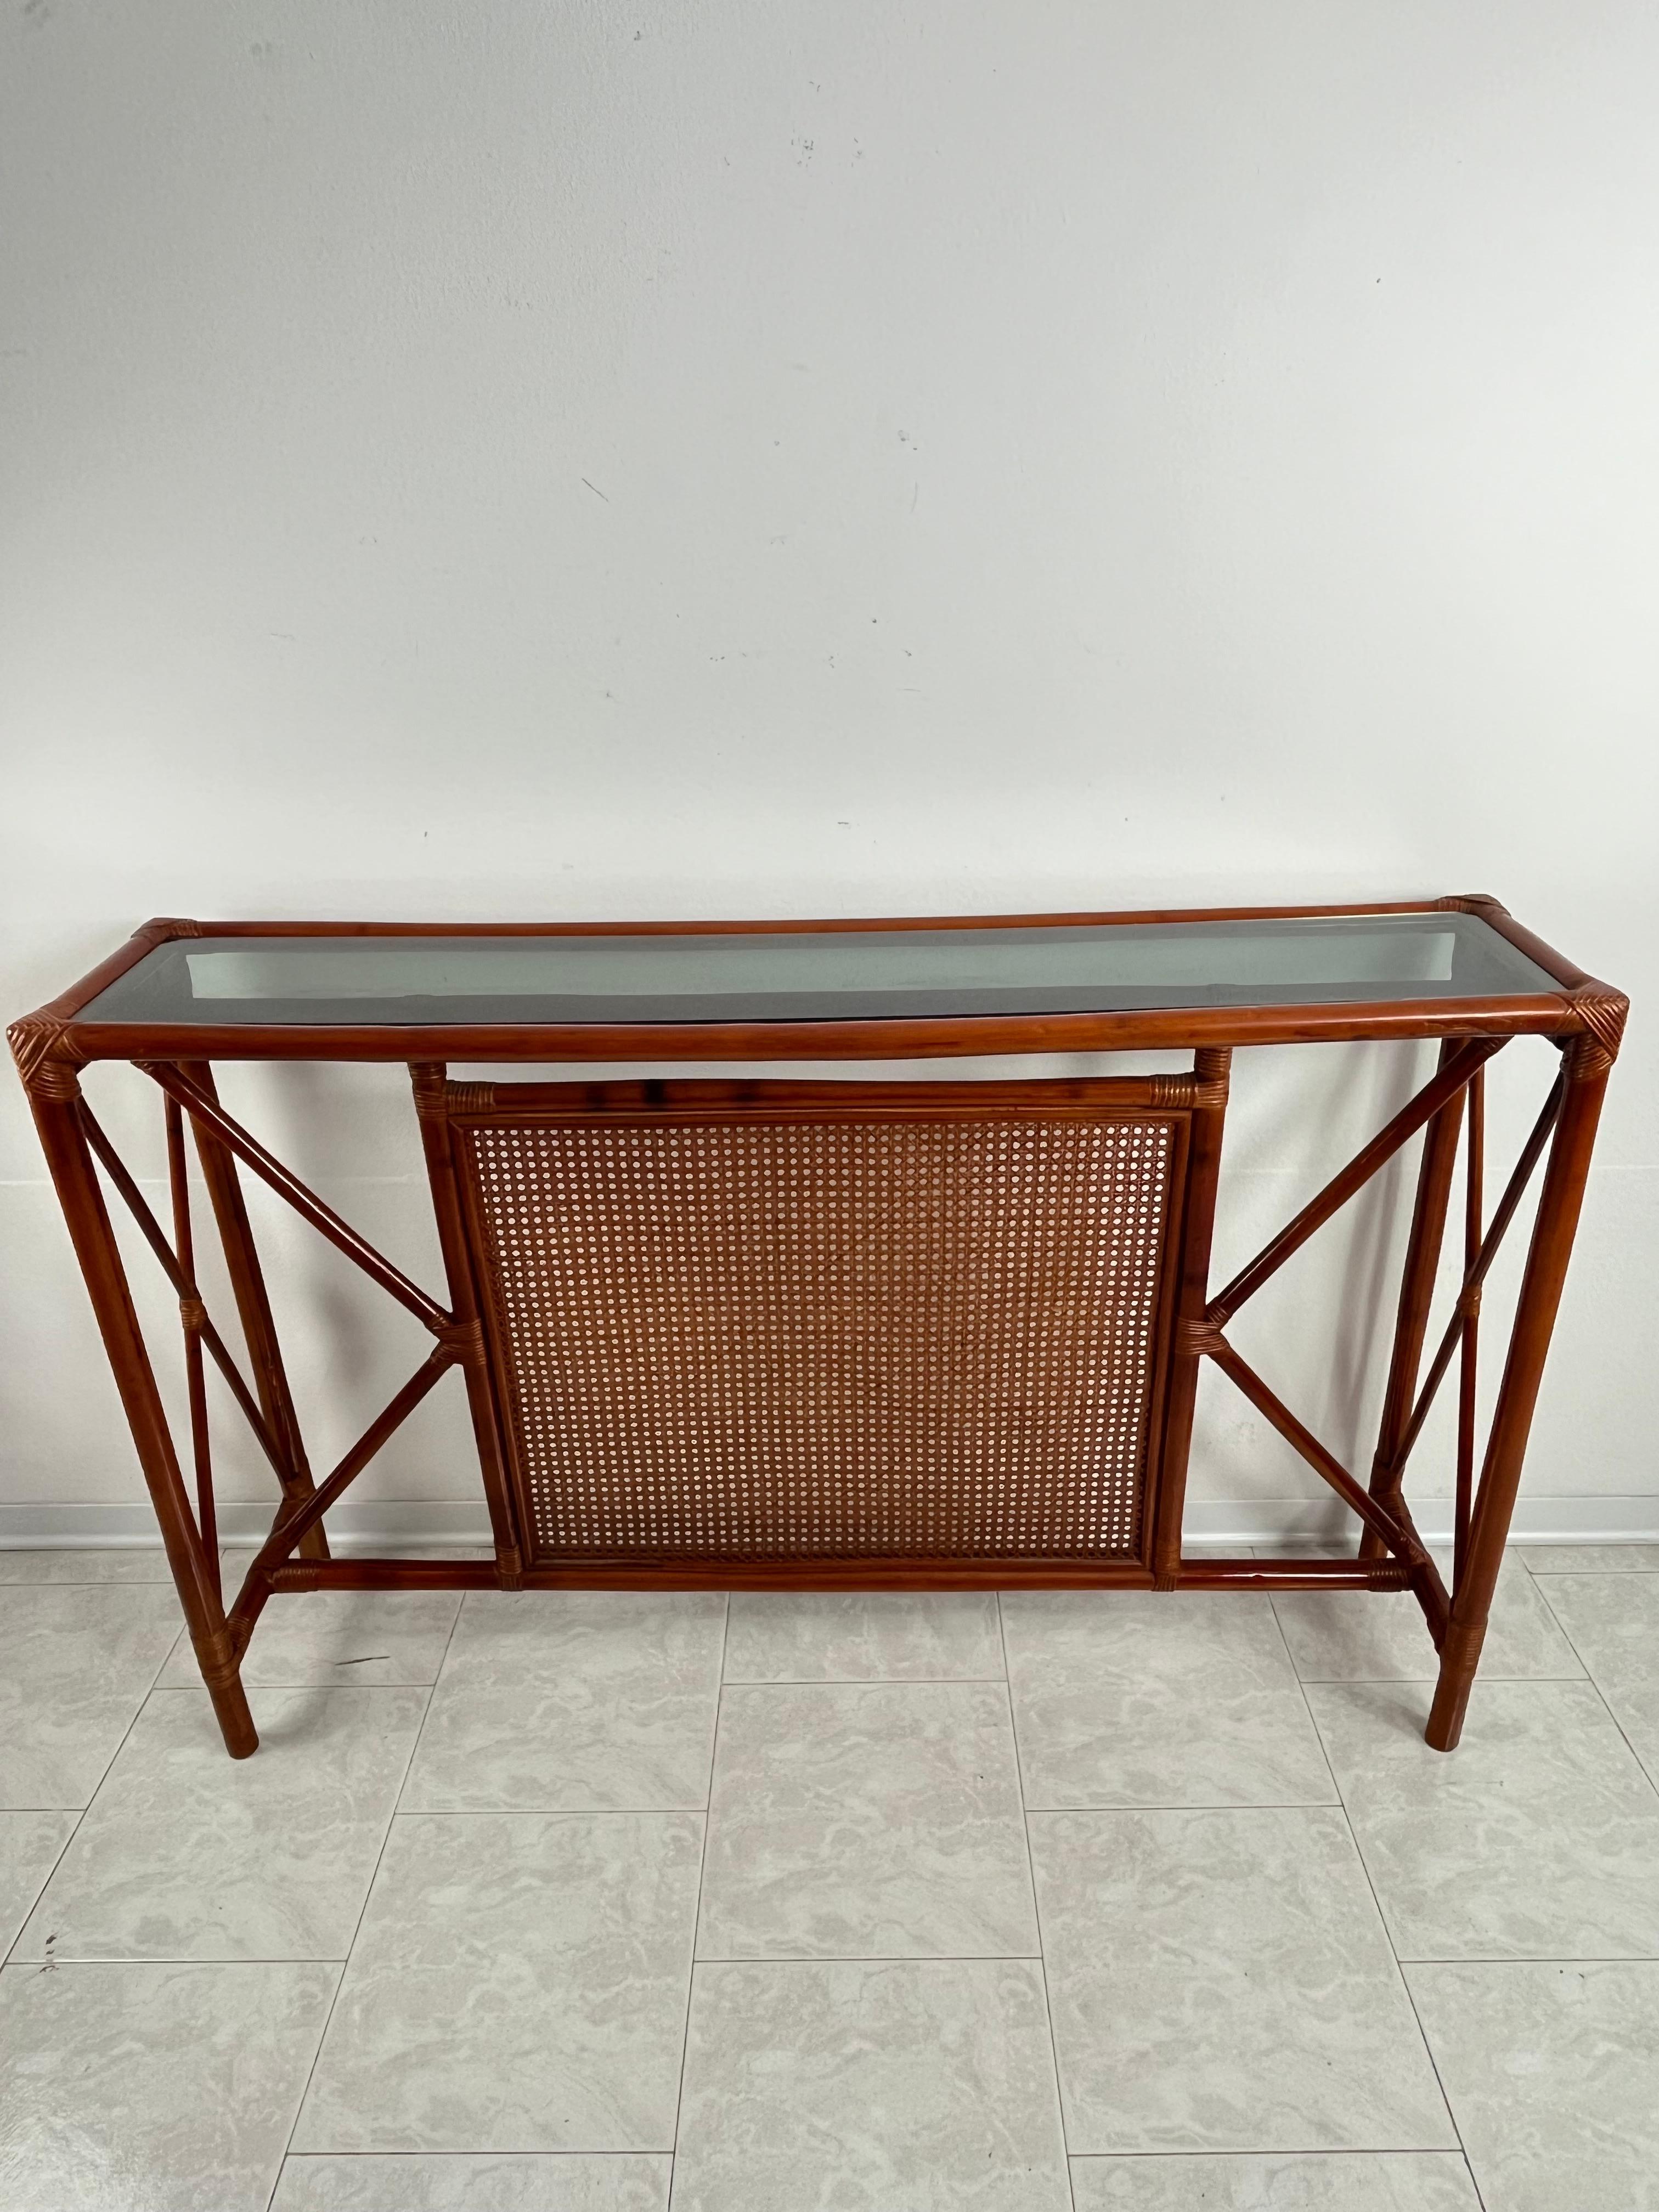 Set of 2 Bamboo and Rattan Console and Mirror Attributed to Franco Albini 1960s For Sale 6